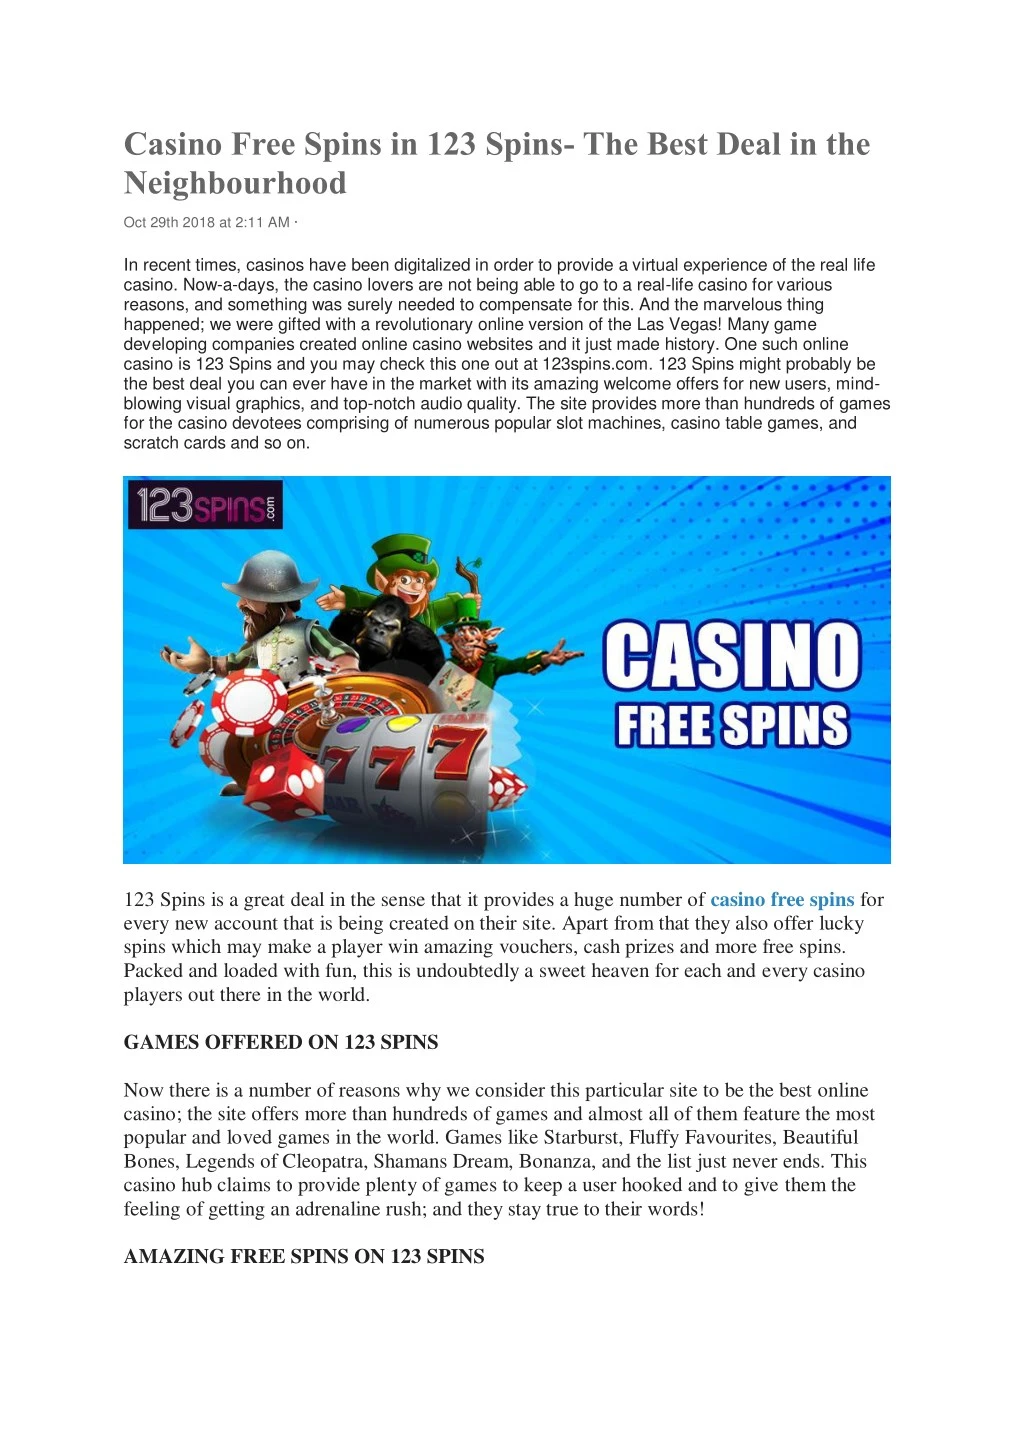 casino free spins in 123 spins the best deal n.